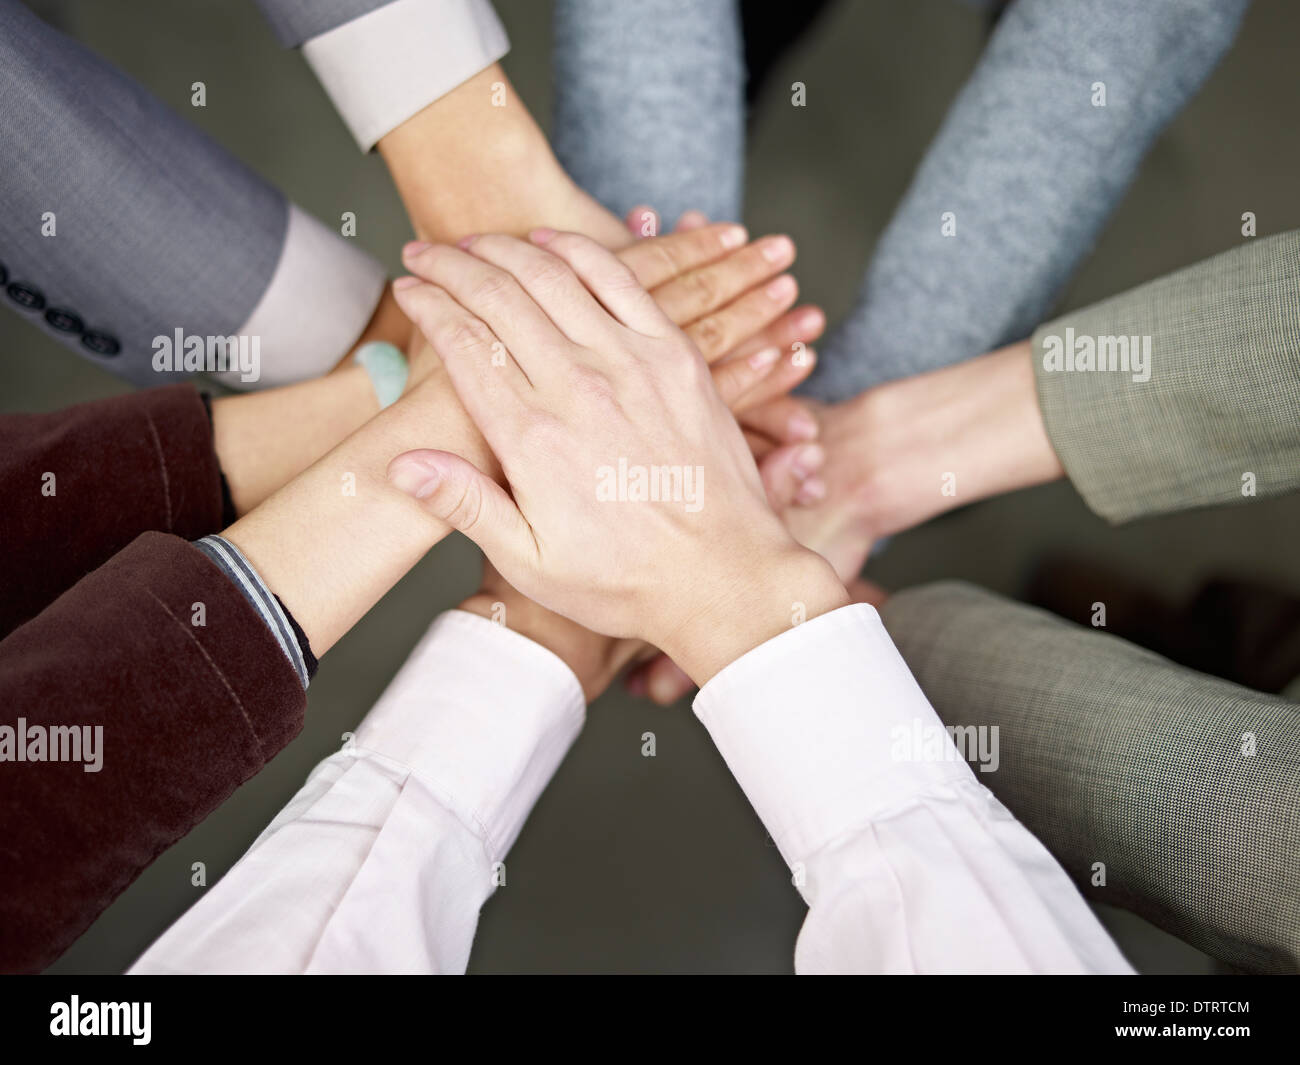 team of businesspeople showing unity by putting hands together. Stock Photo